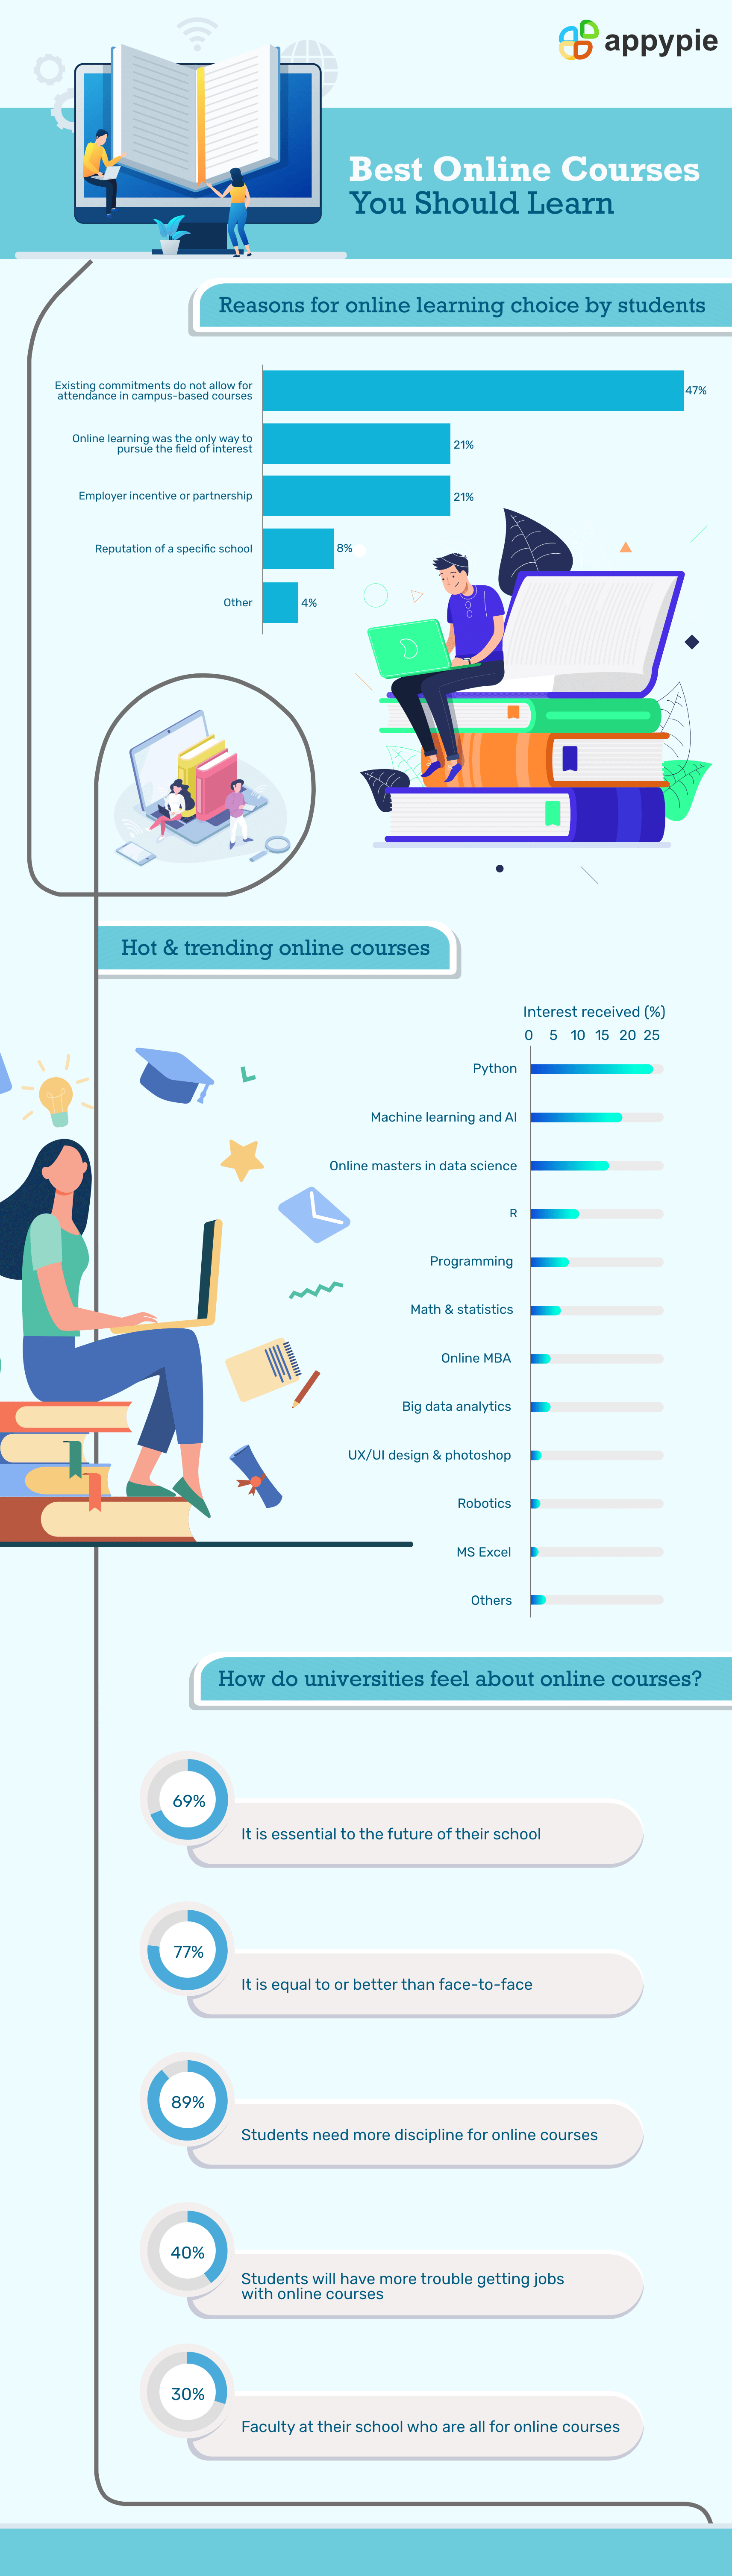 9 Best Free Online Courses for Anything You Want to Learn - Appy Pie